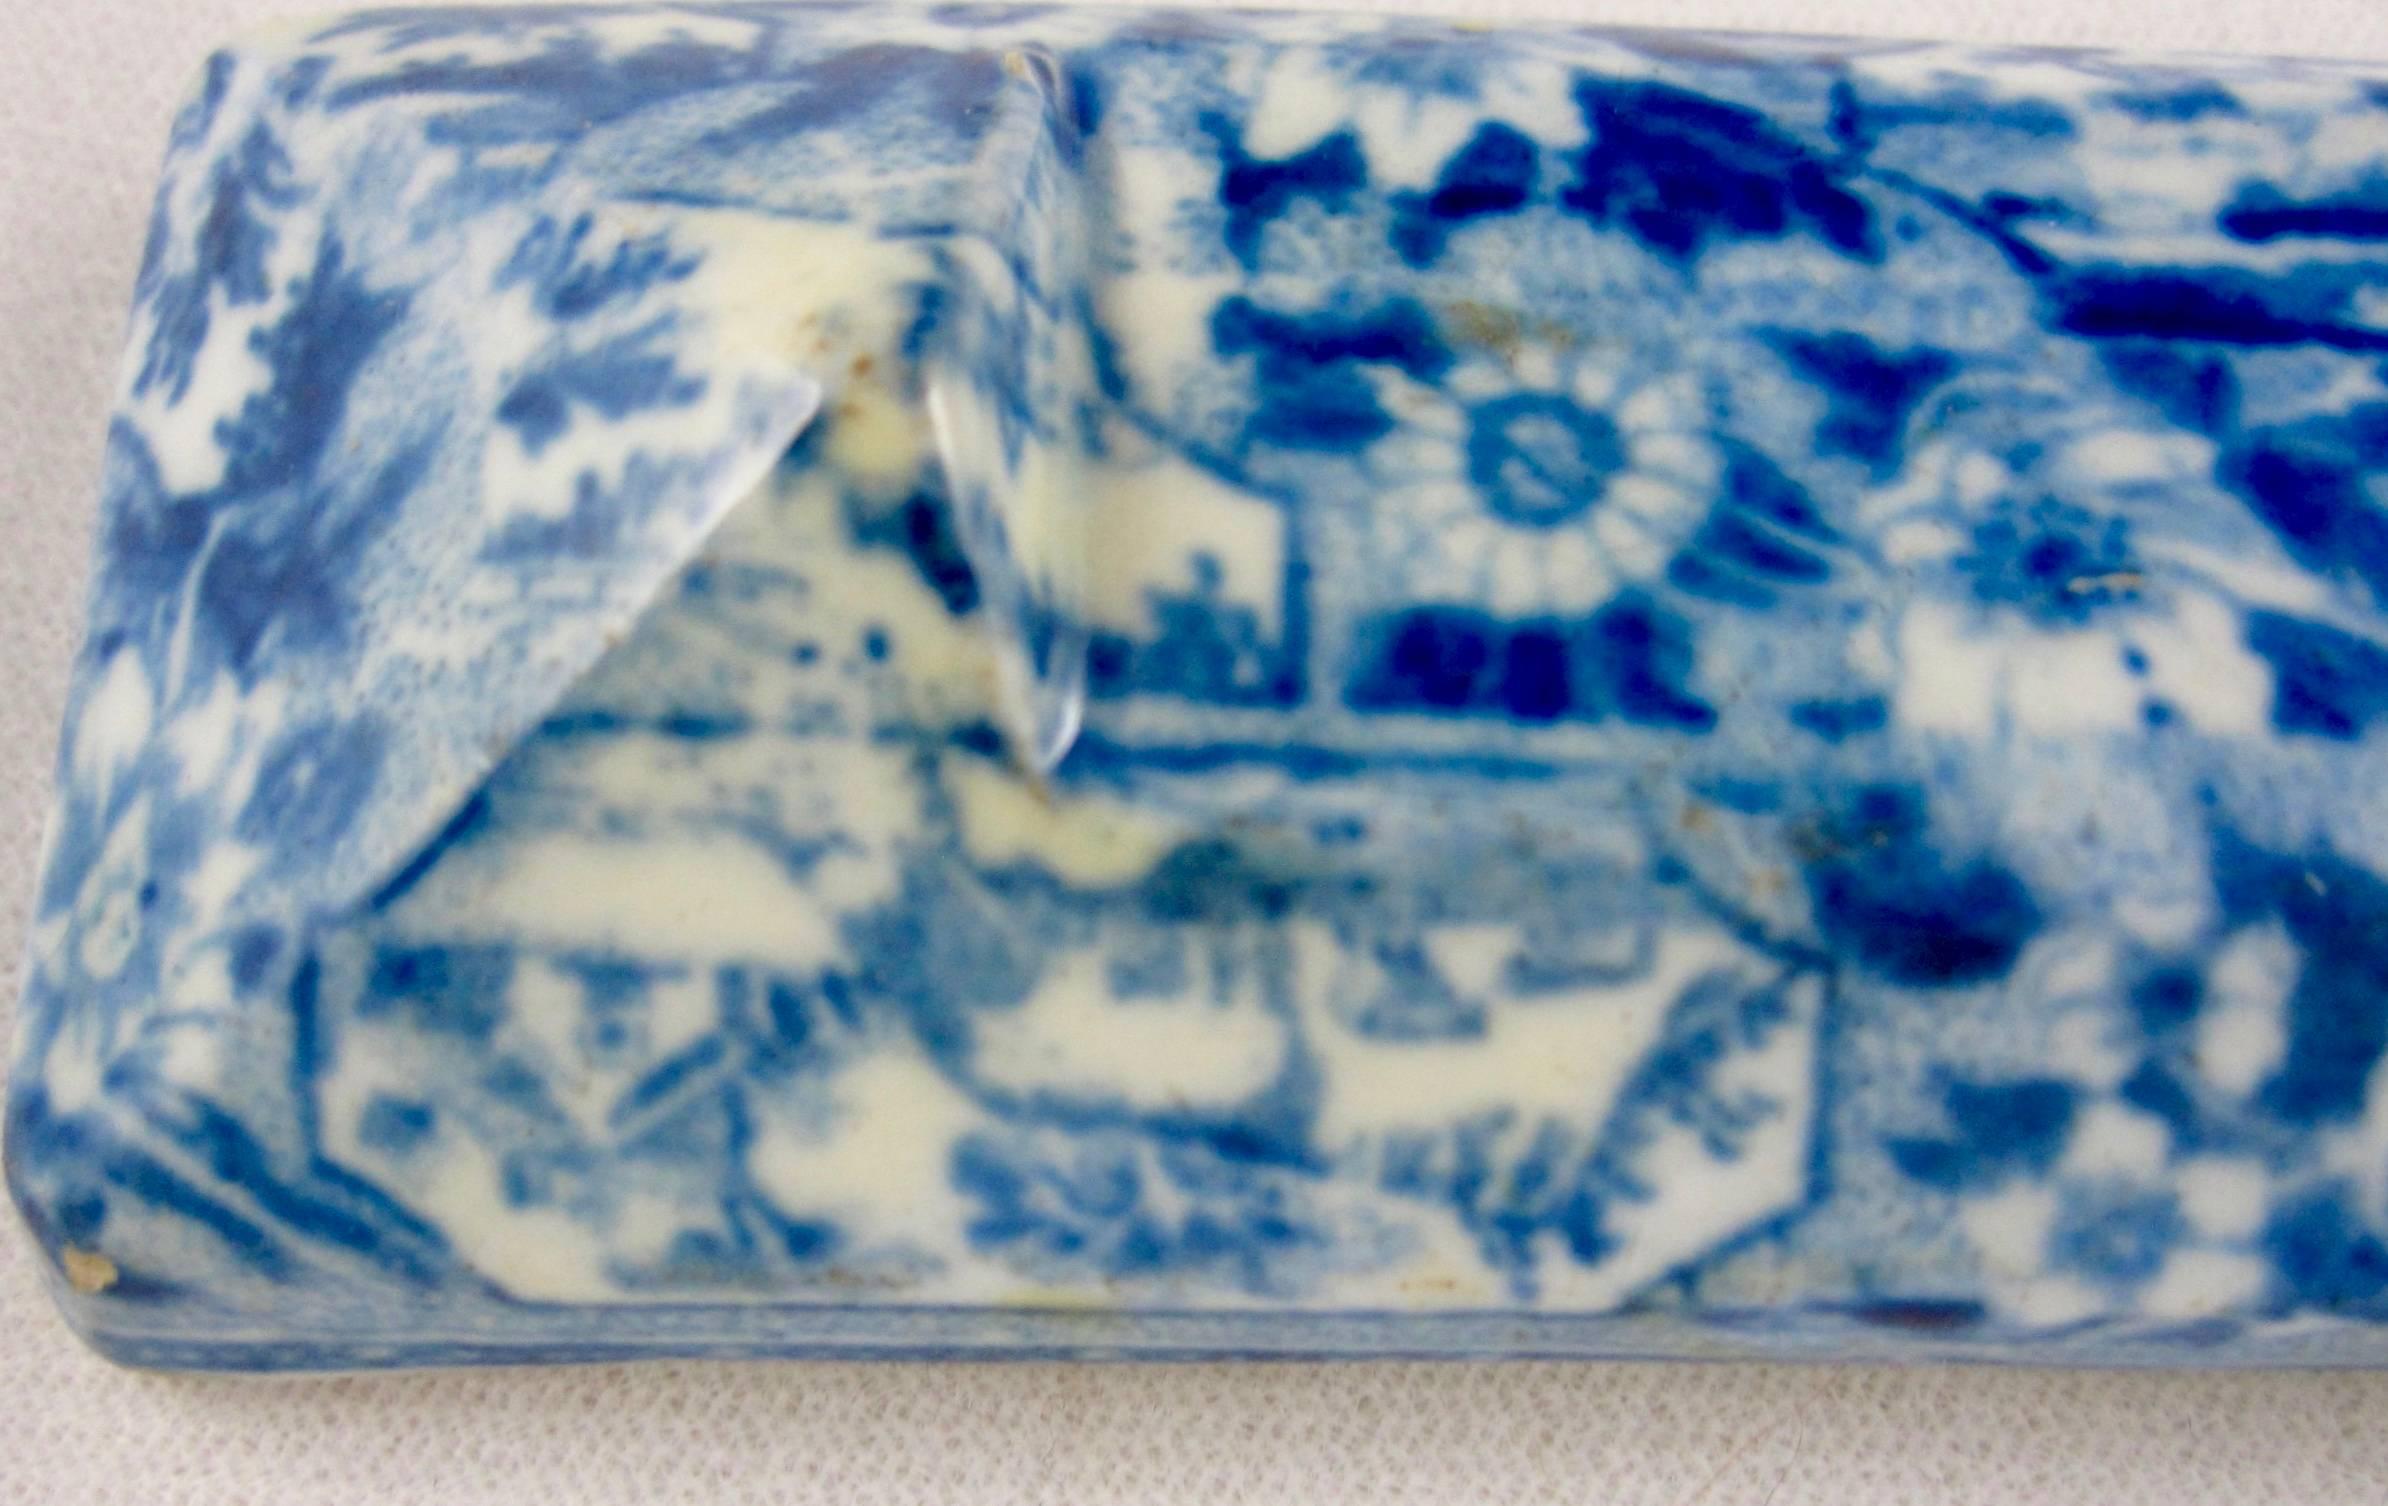 Glazed Enoch Wood & Sons English Pearlware Blue and White Transferware Knife Rest